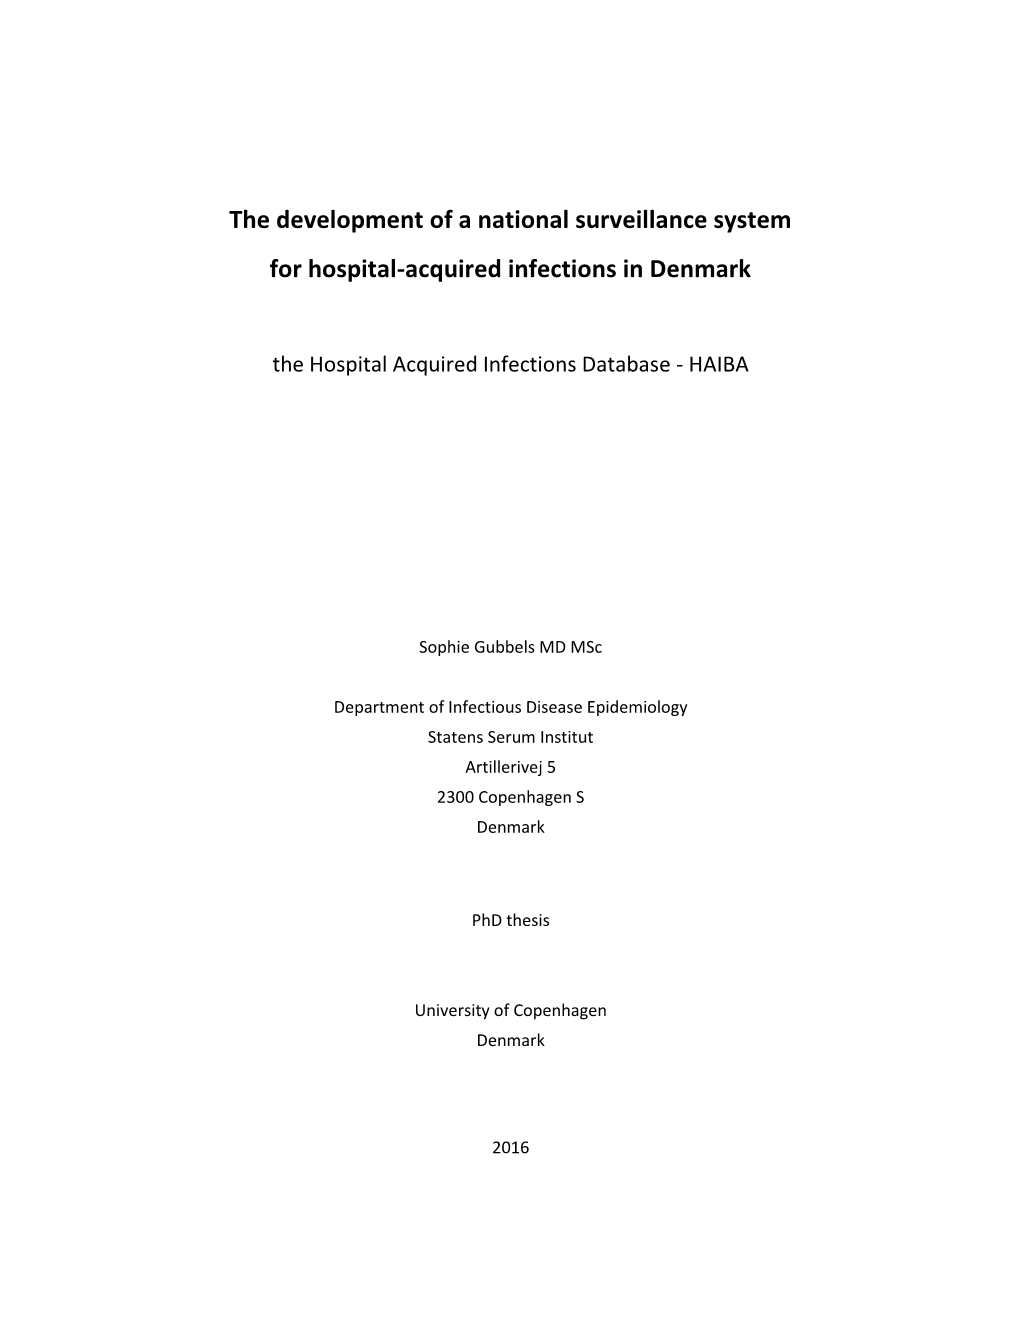 The Hospital Acquired Infections Database - HAIBA